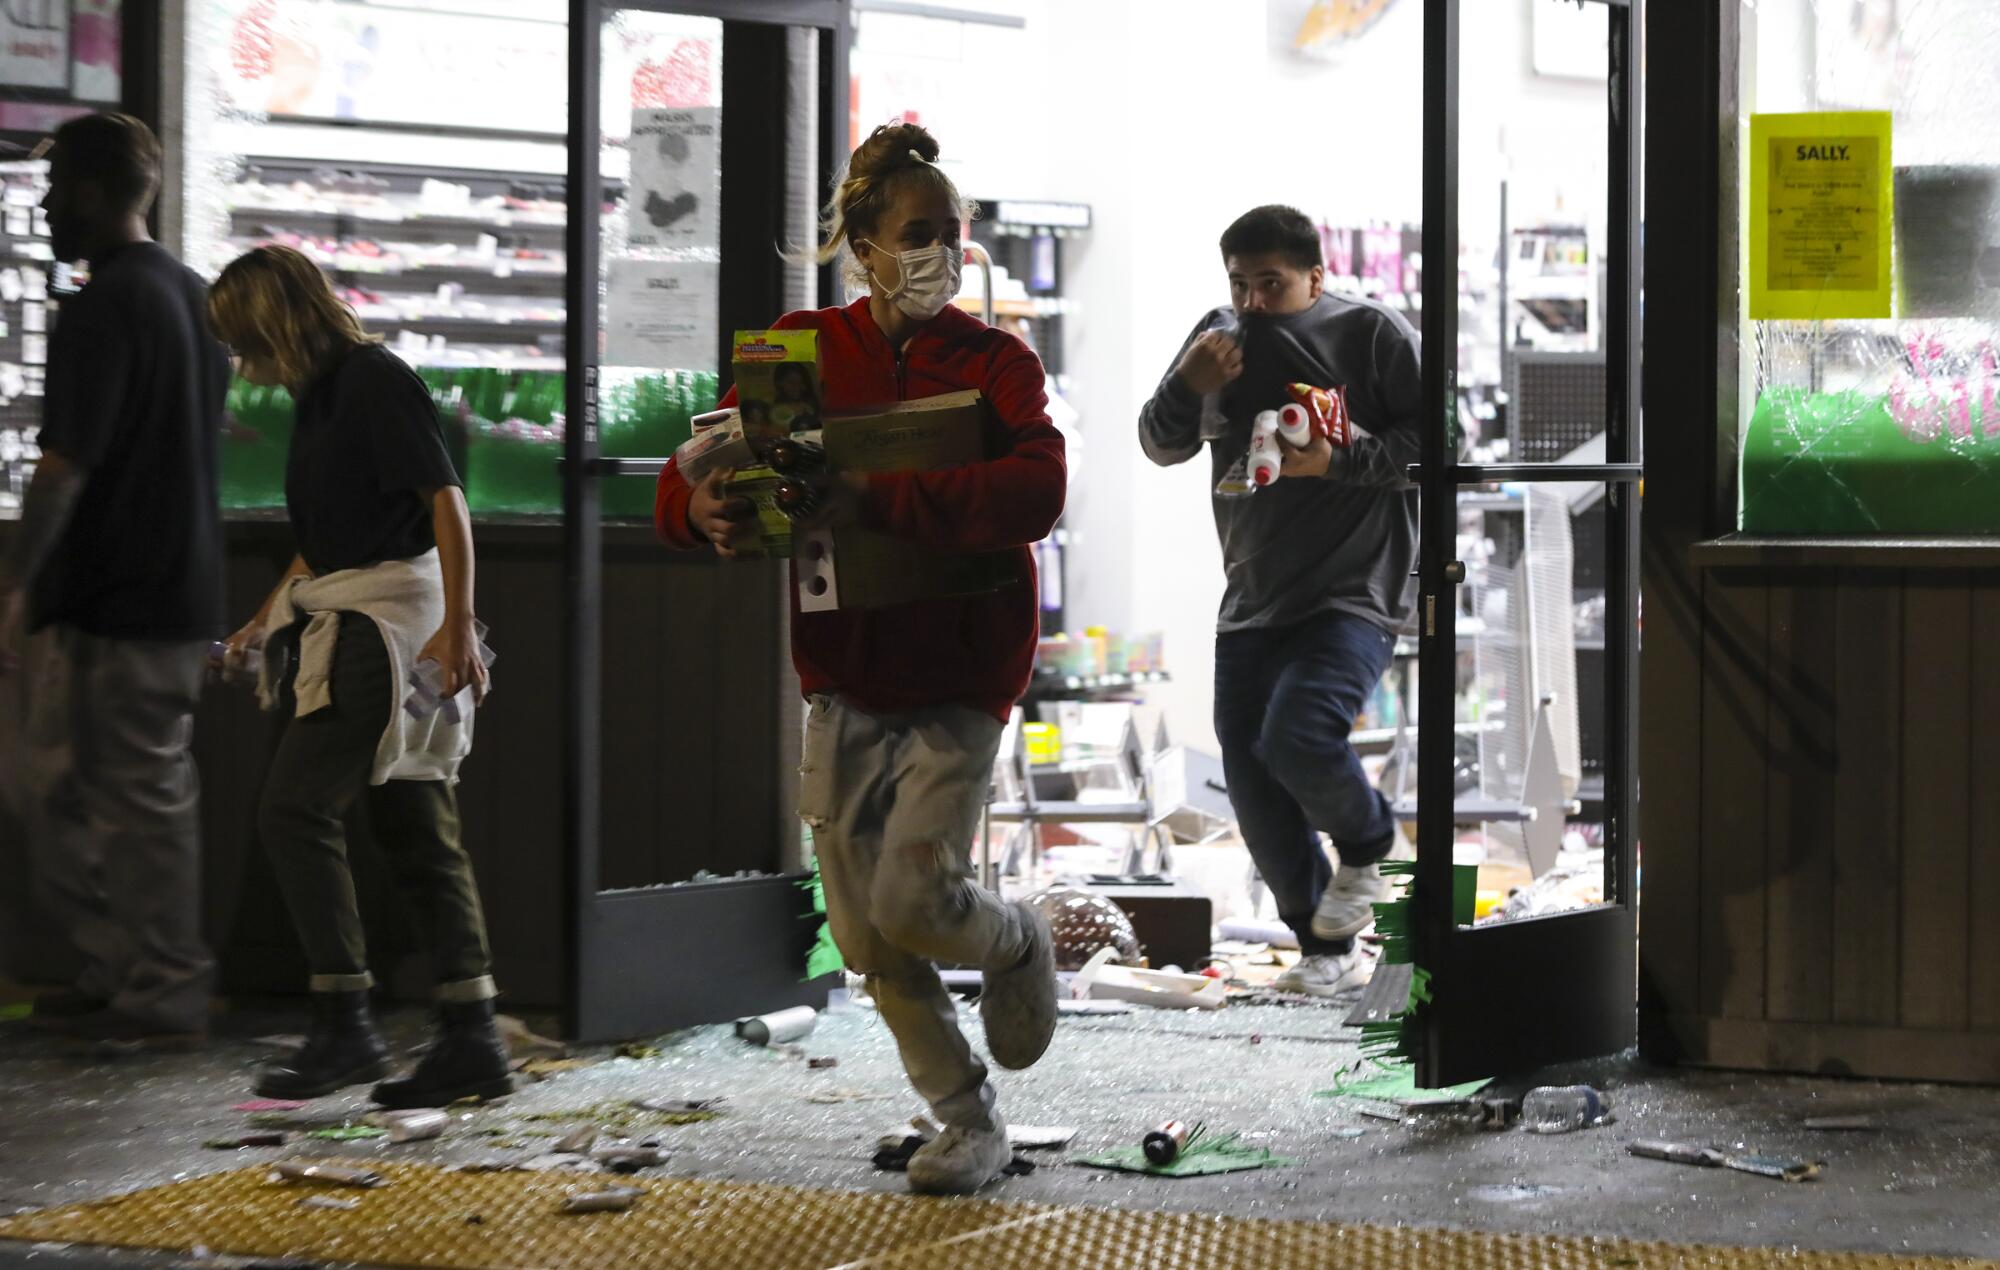 By nightfall on Saturday, looters had smashed windows and taken items from a number of retail stores at the La Mesa Springs shopping center.